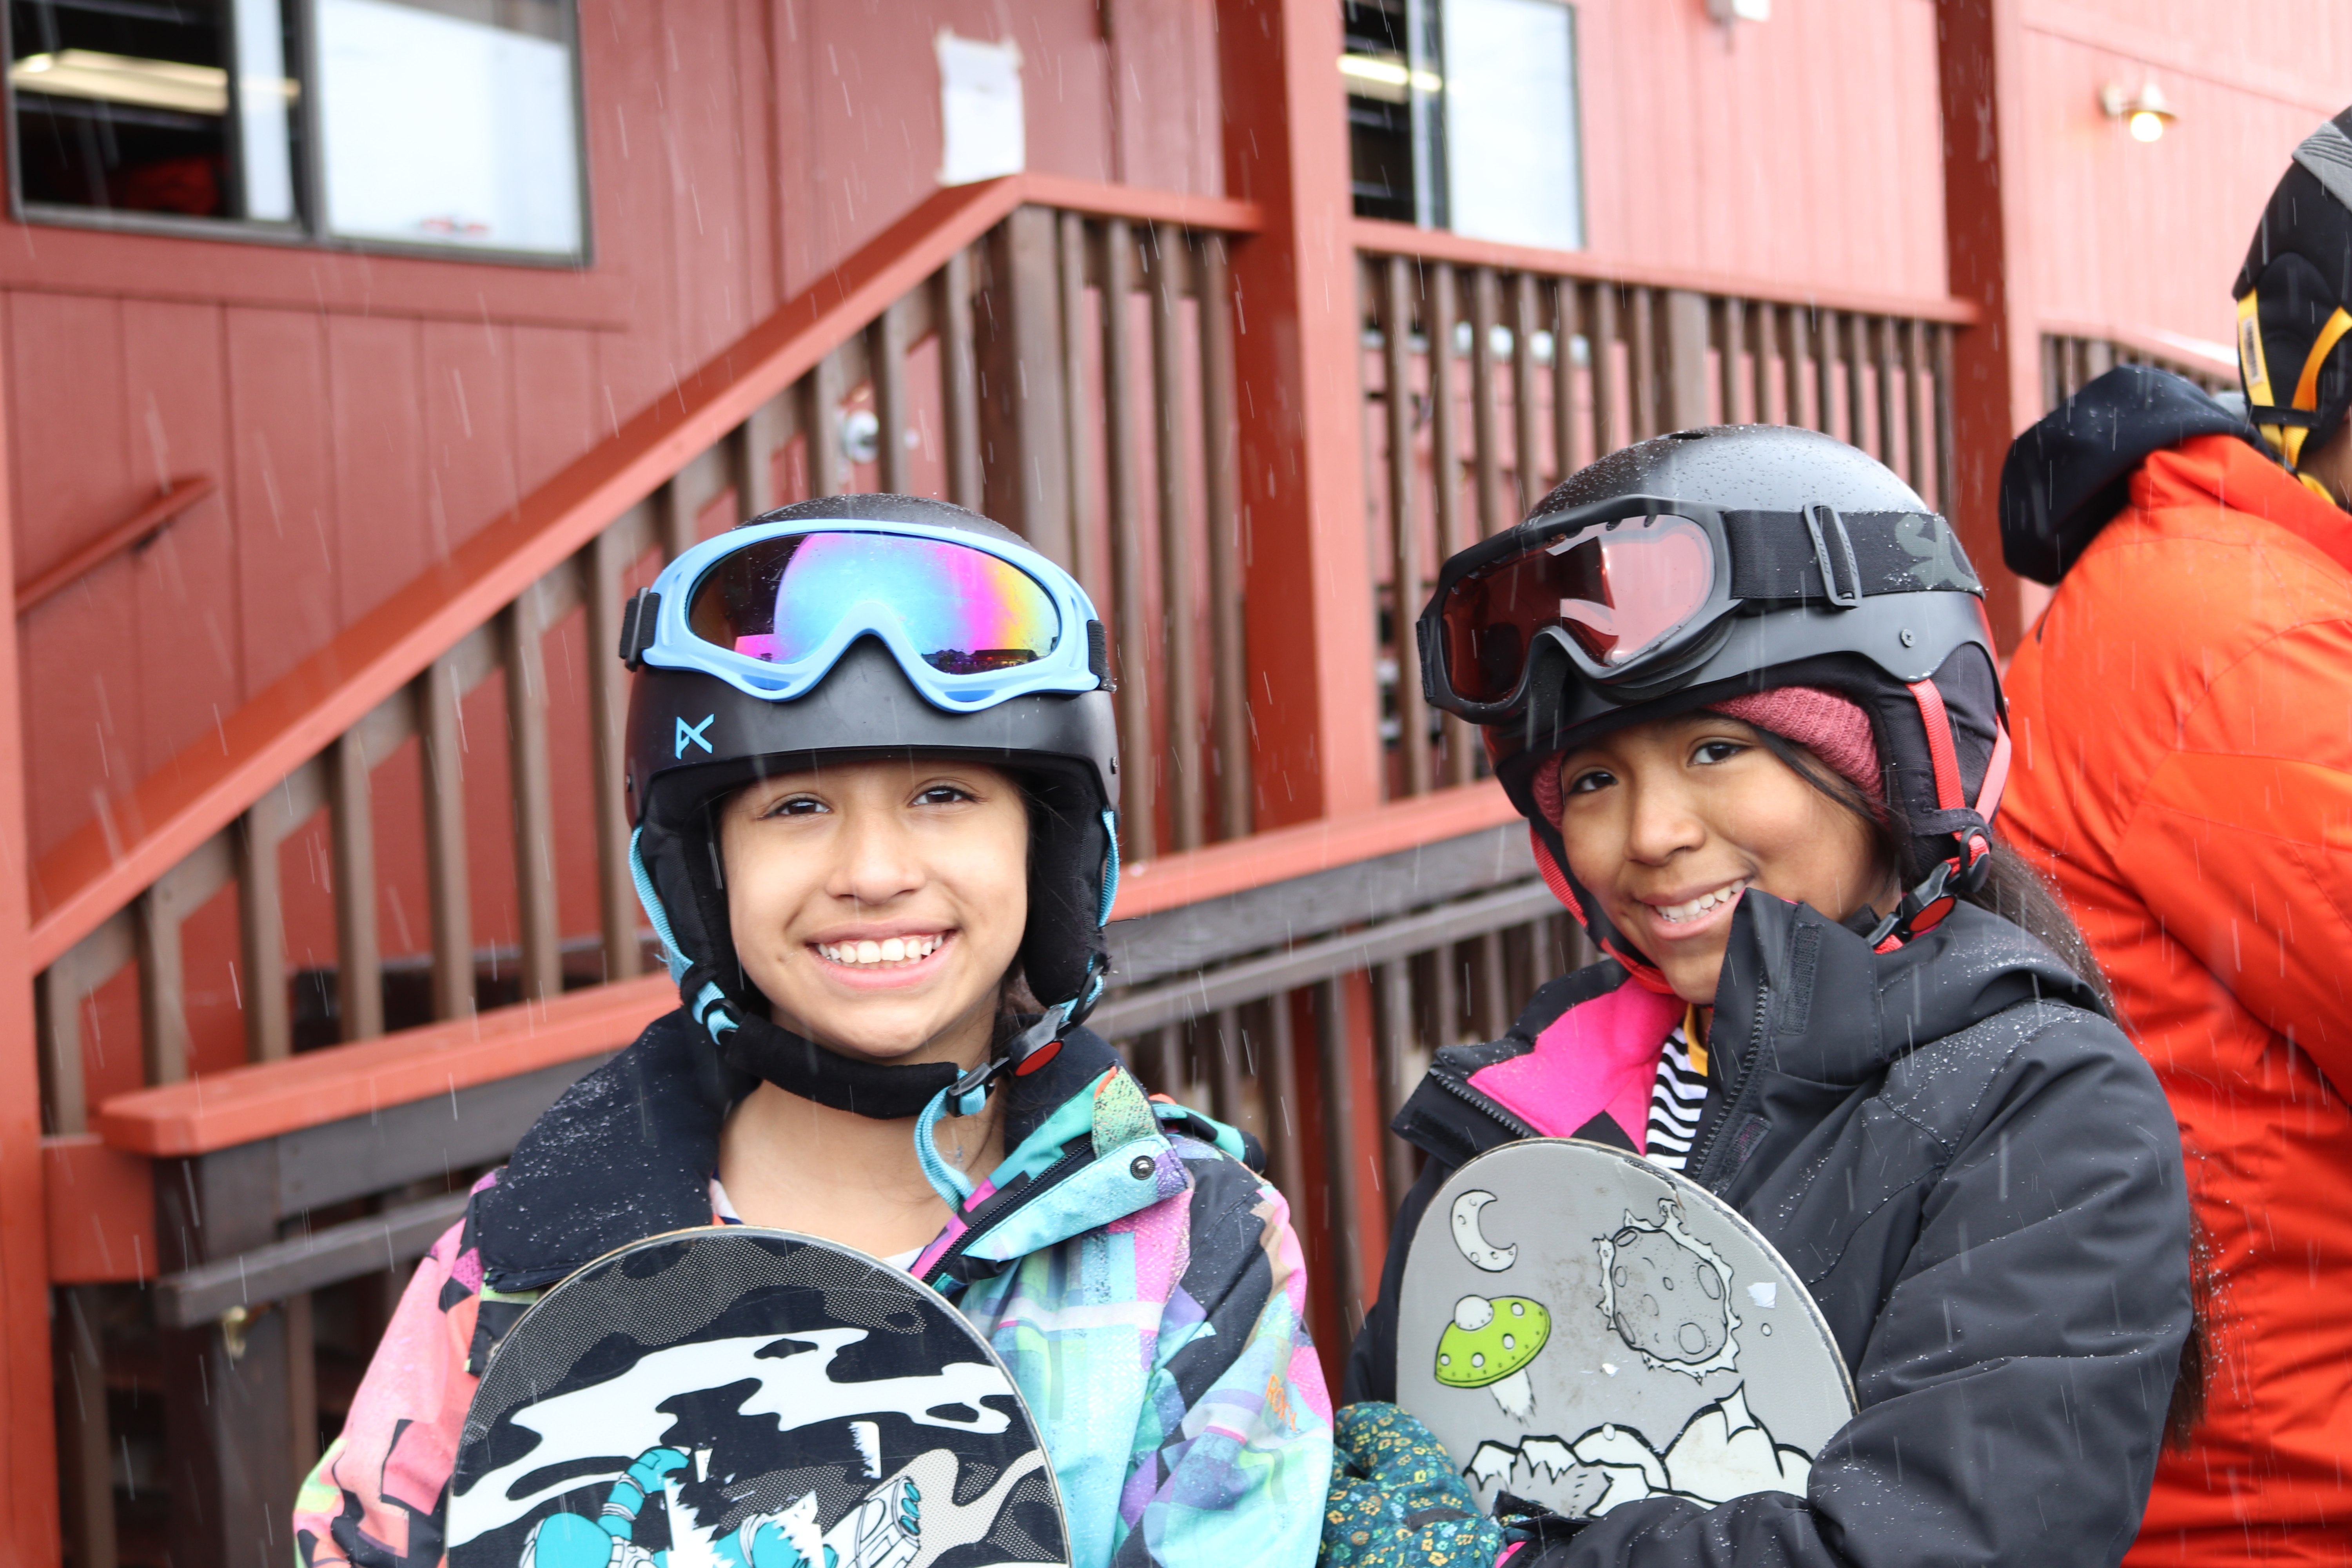 two girls hold snowboards and wear helmets and goggles on their heads